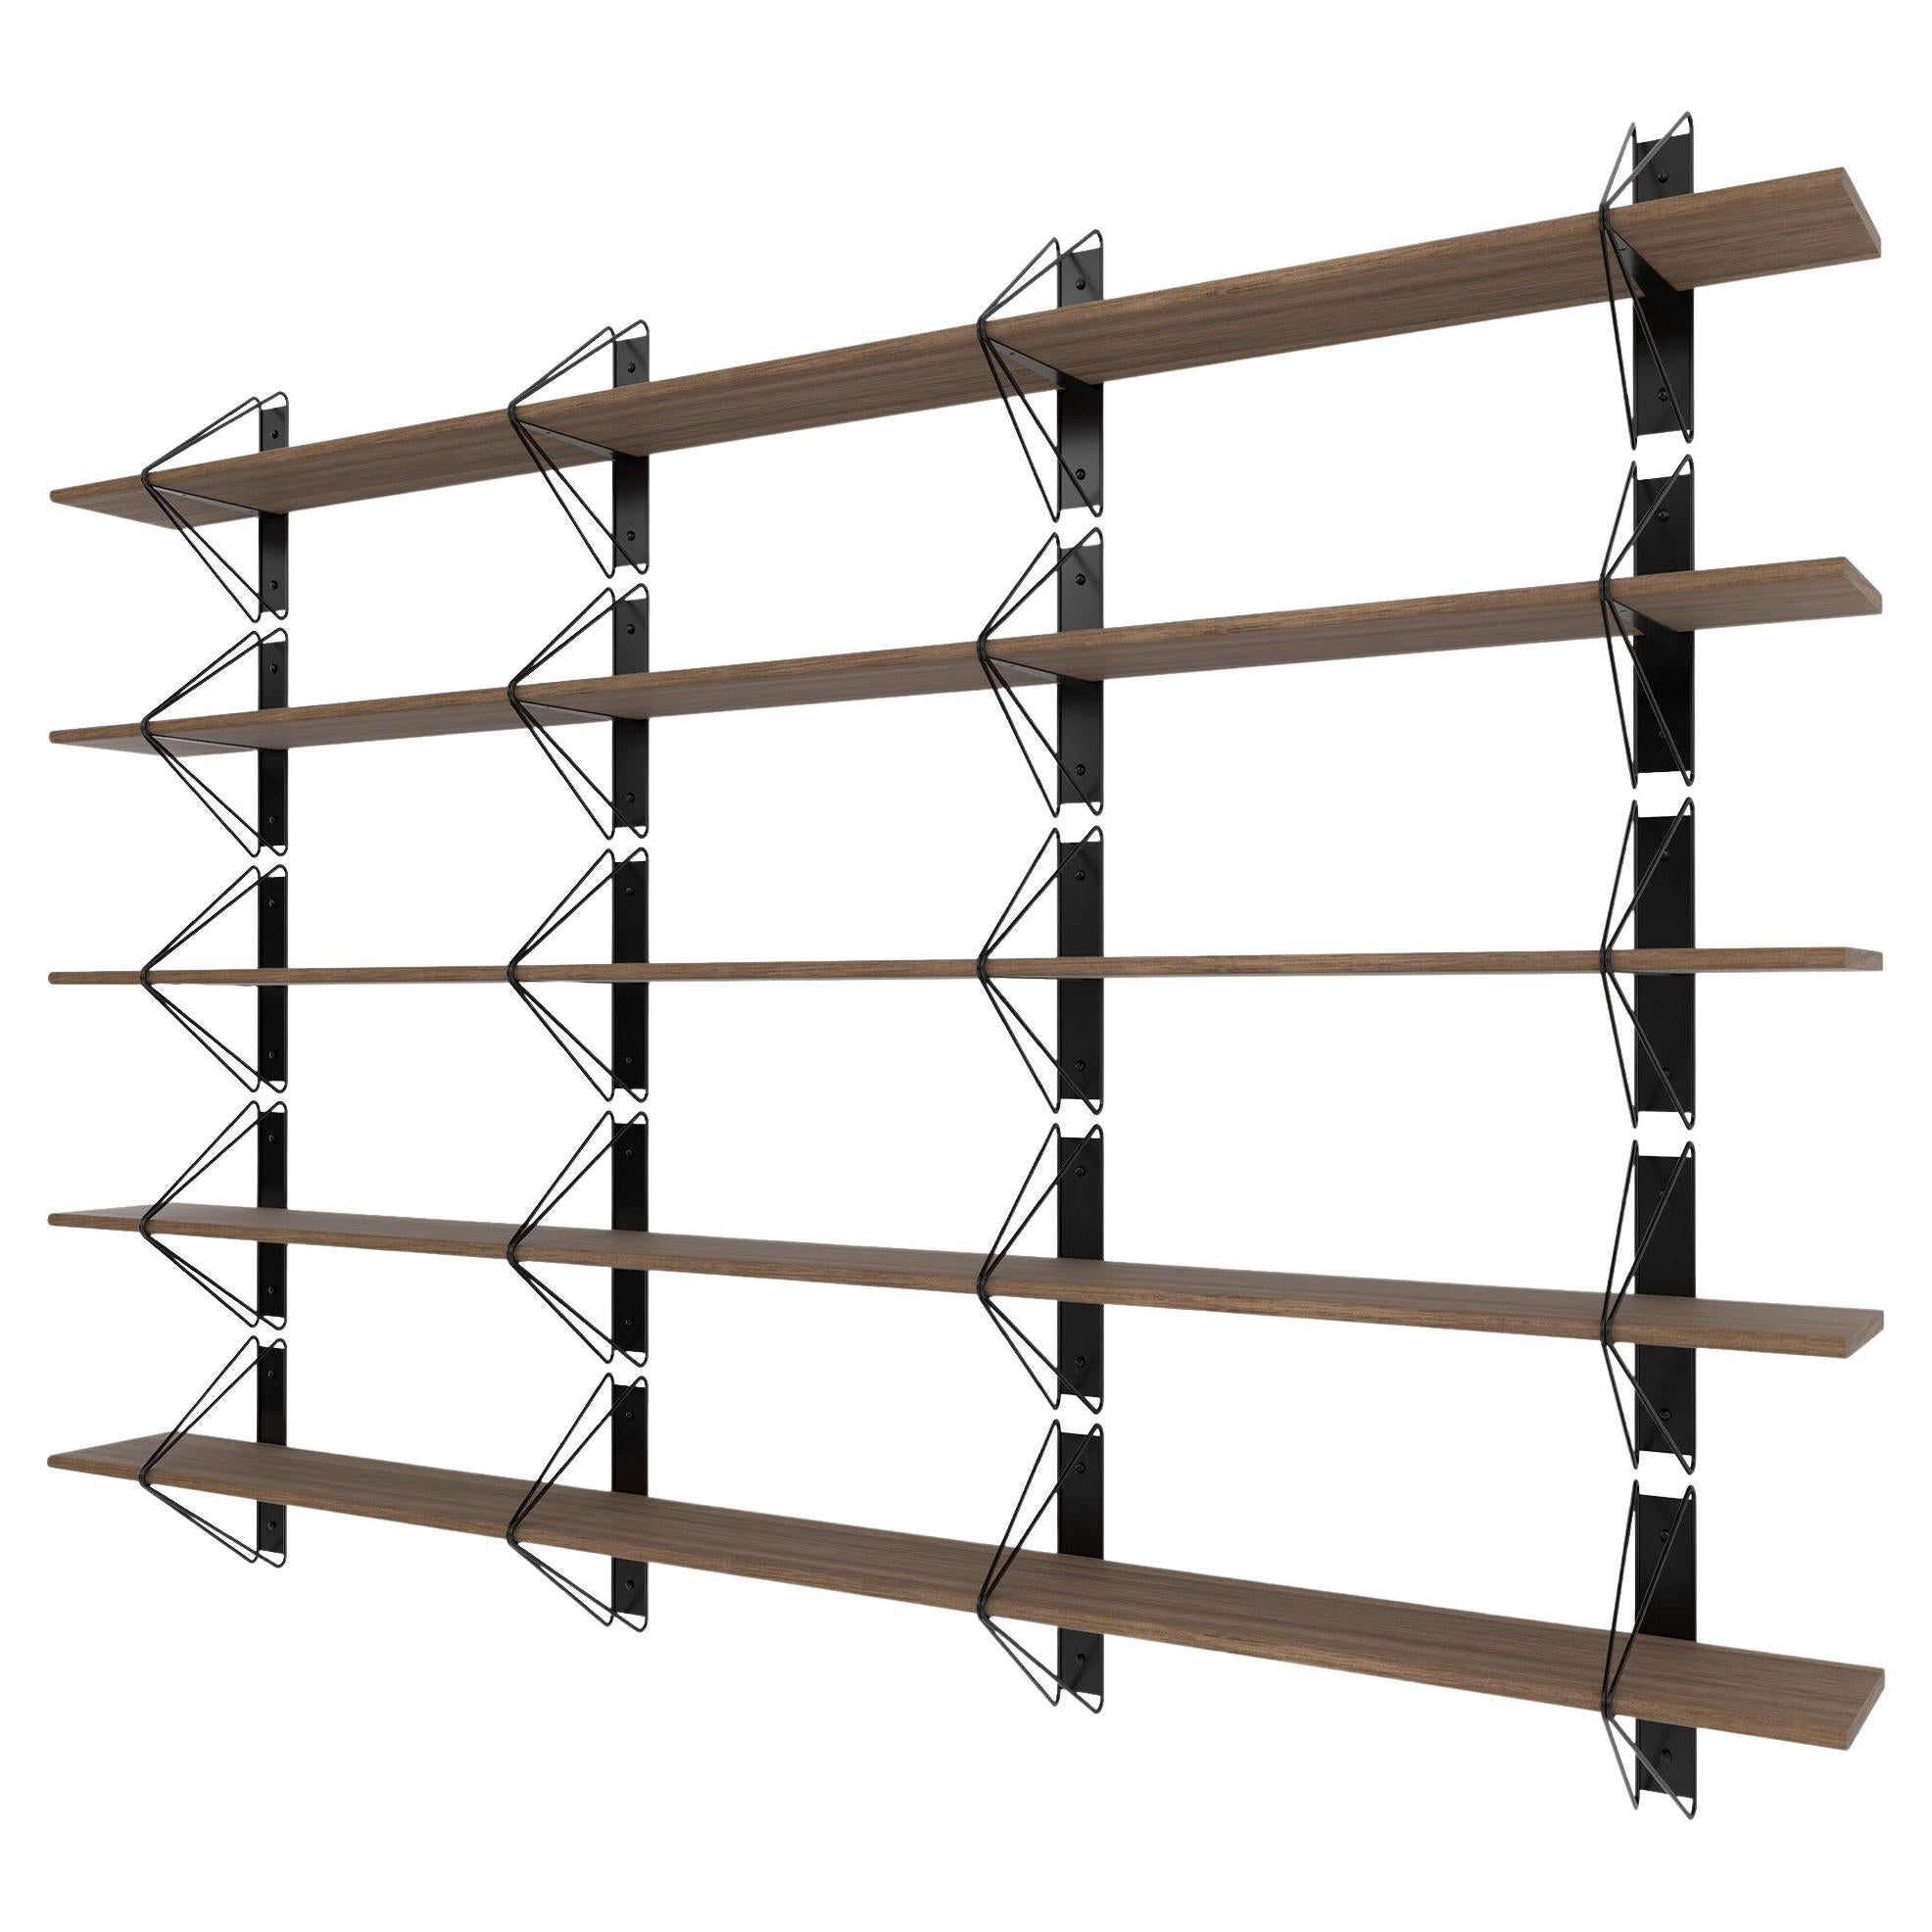 Set of 5 Strut Shelves from Souda, Black and Walnut, Made to Order For Sale